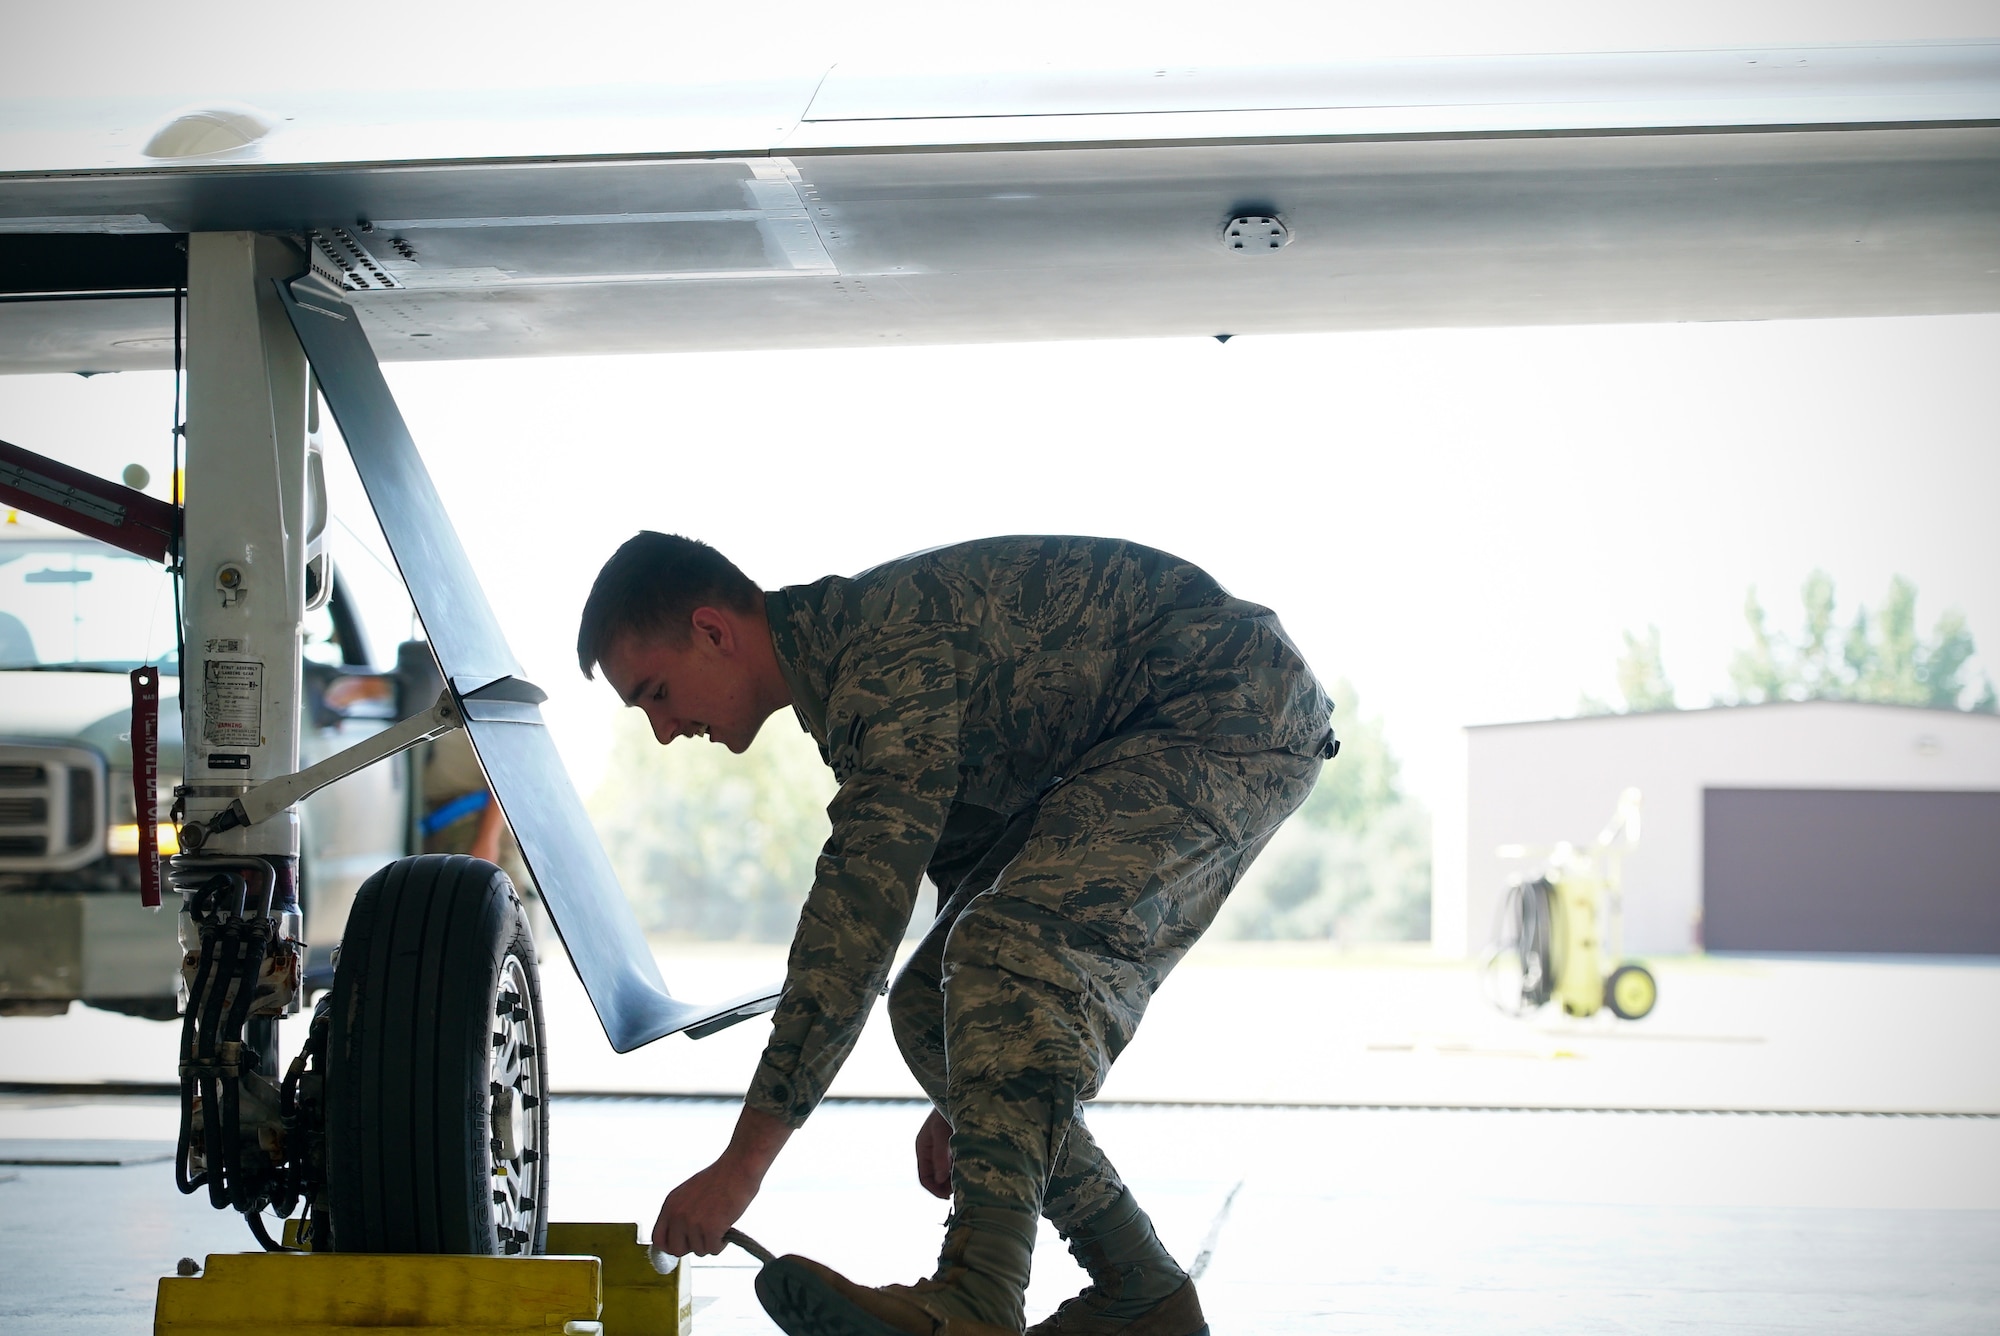 A man in military is shown center-frame leaning down to place chocks beneath an aircraft wheel.